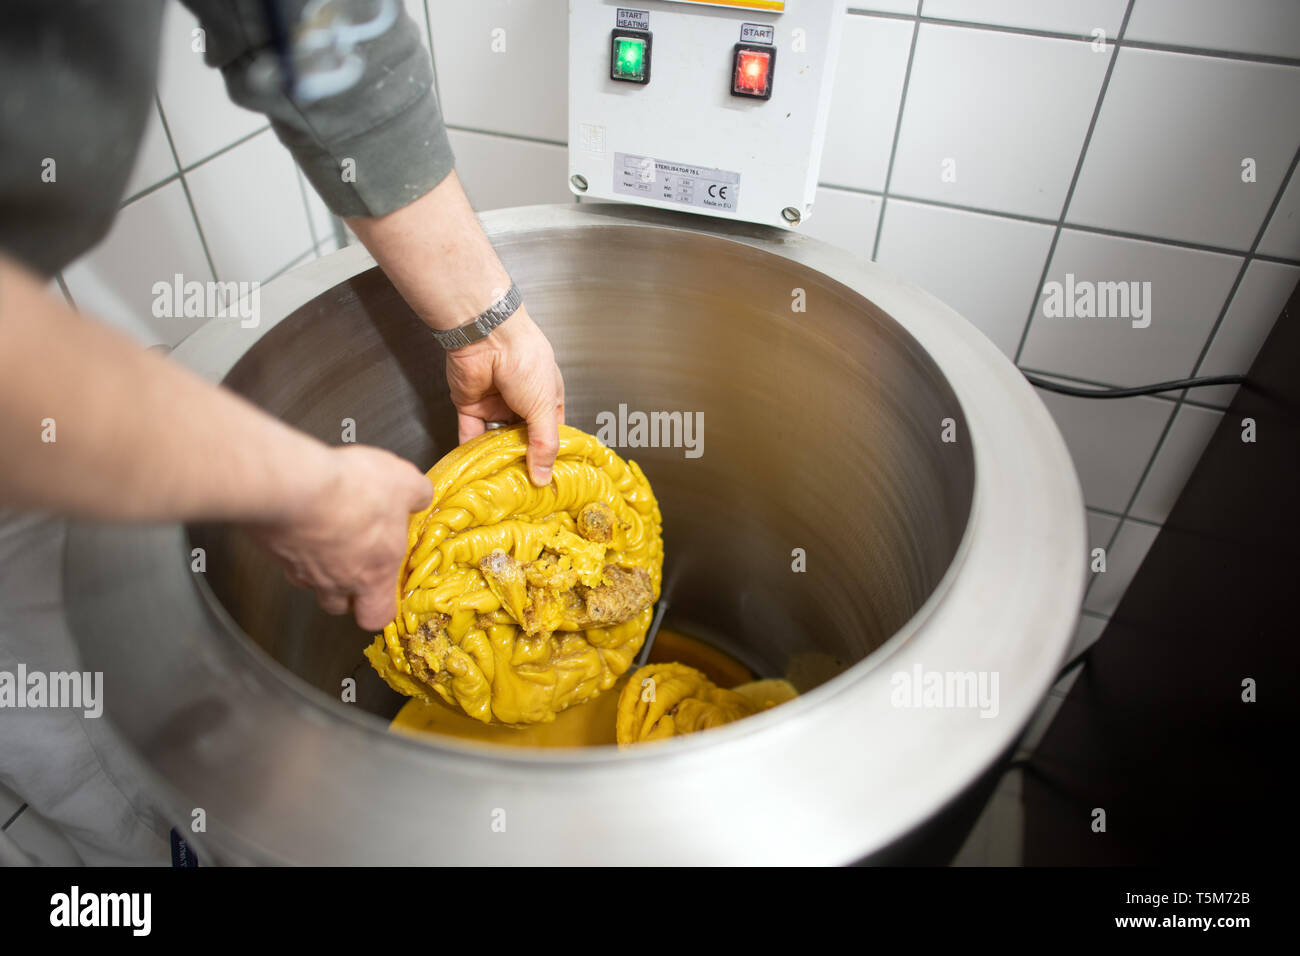 Remscheid, Germany. 10th Apr, 2019. A prisoner is processing wax to heat it. In NRW, prisoners become active in the fight against bee mortality. Even tough boys learn to take responsibility in dealing with 'Maja' and her friends. In the Remscheid prison they look after around 3 million bees, carpenter bee houses and sell honey. (to dpa 'prison bees' teach prisoners patience: 'One mistake, one sting') Credit: Federico Gambarini/dpa/Alamy Live News Stock Photo